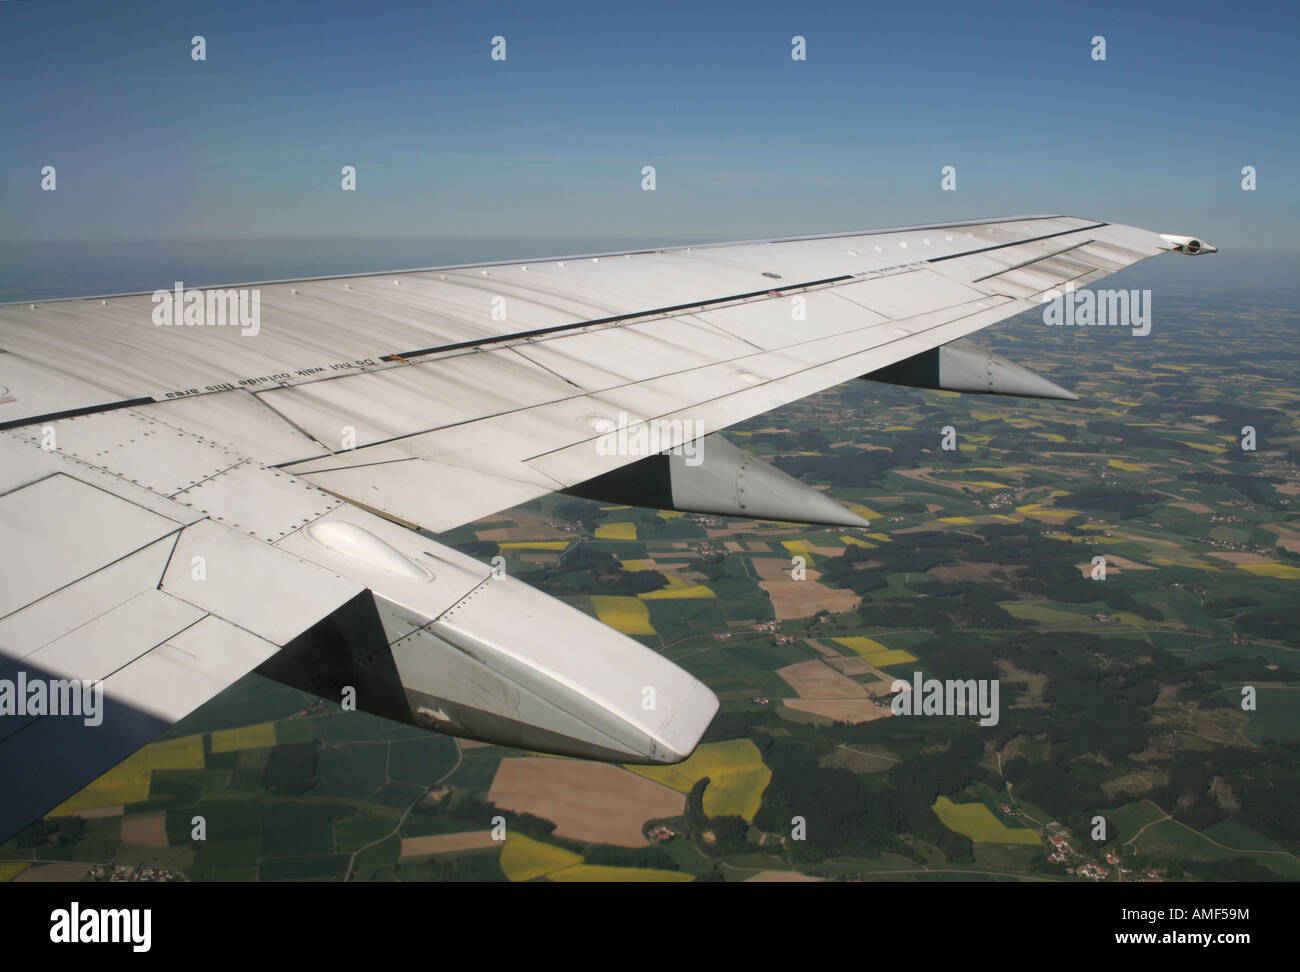 The wing of a Boeing 737-500 airliner in flight over the German countryside. Air travel. Stock Photo